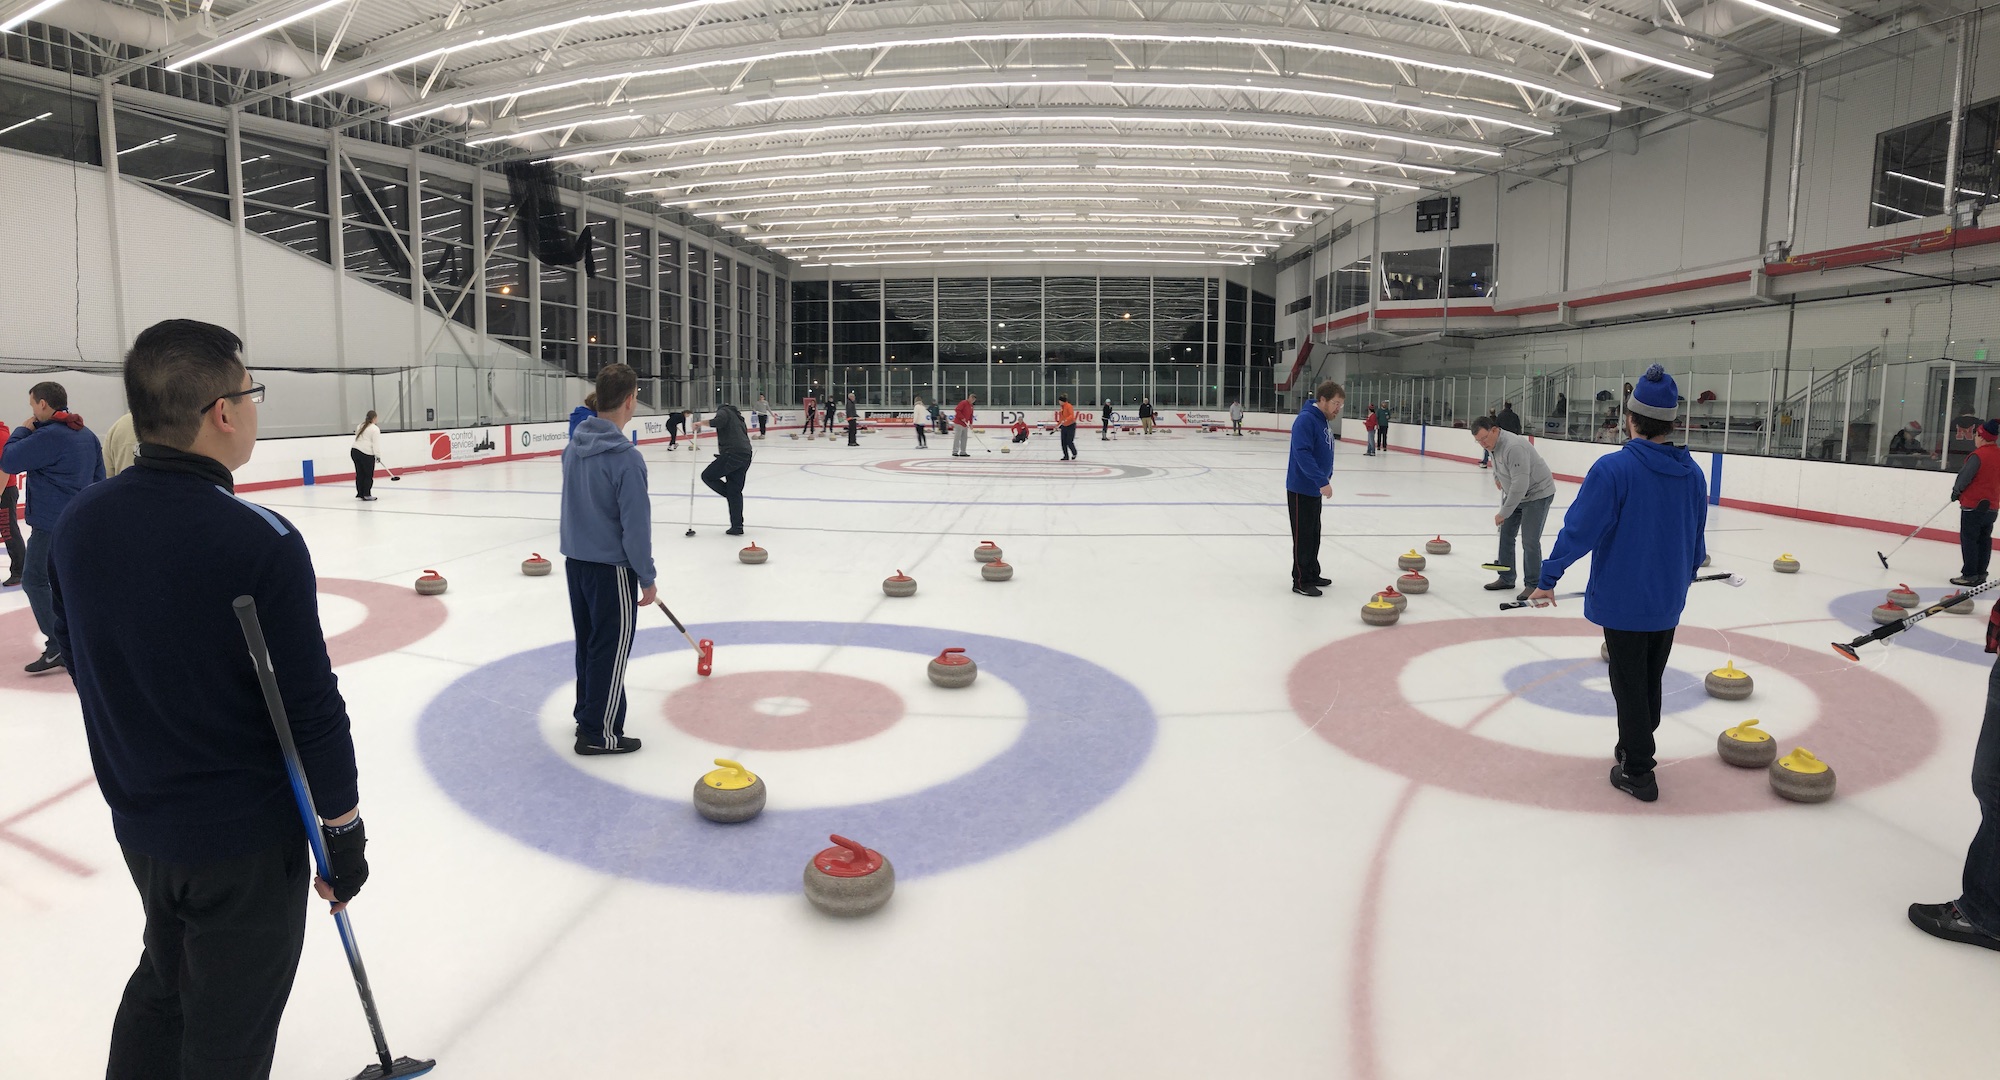 Practice Ice / Drop-in Curling - Sunday, Mar 13, 2022 at 4:30pm